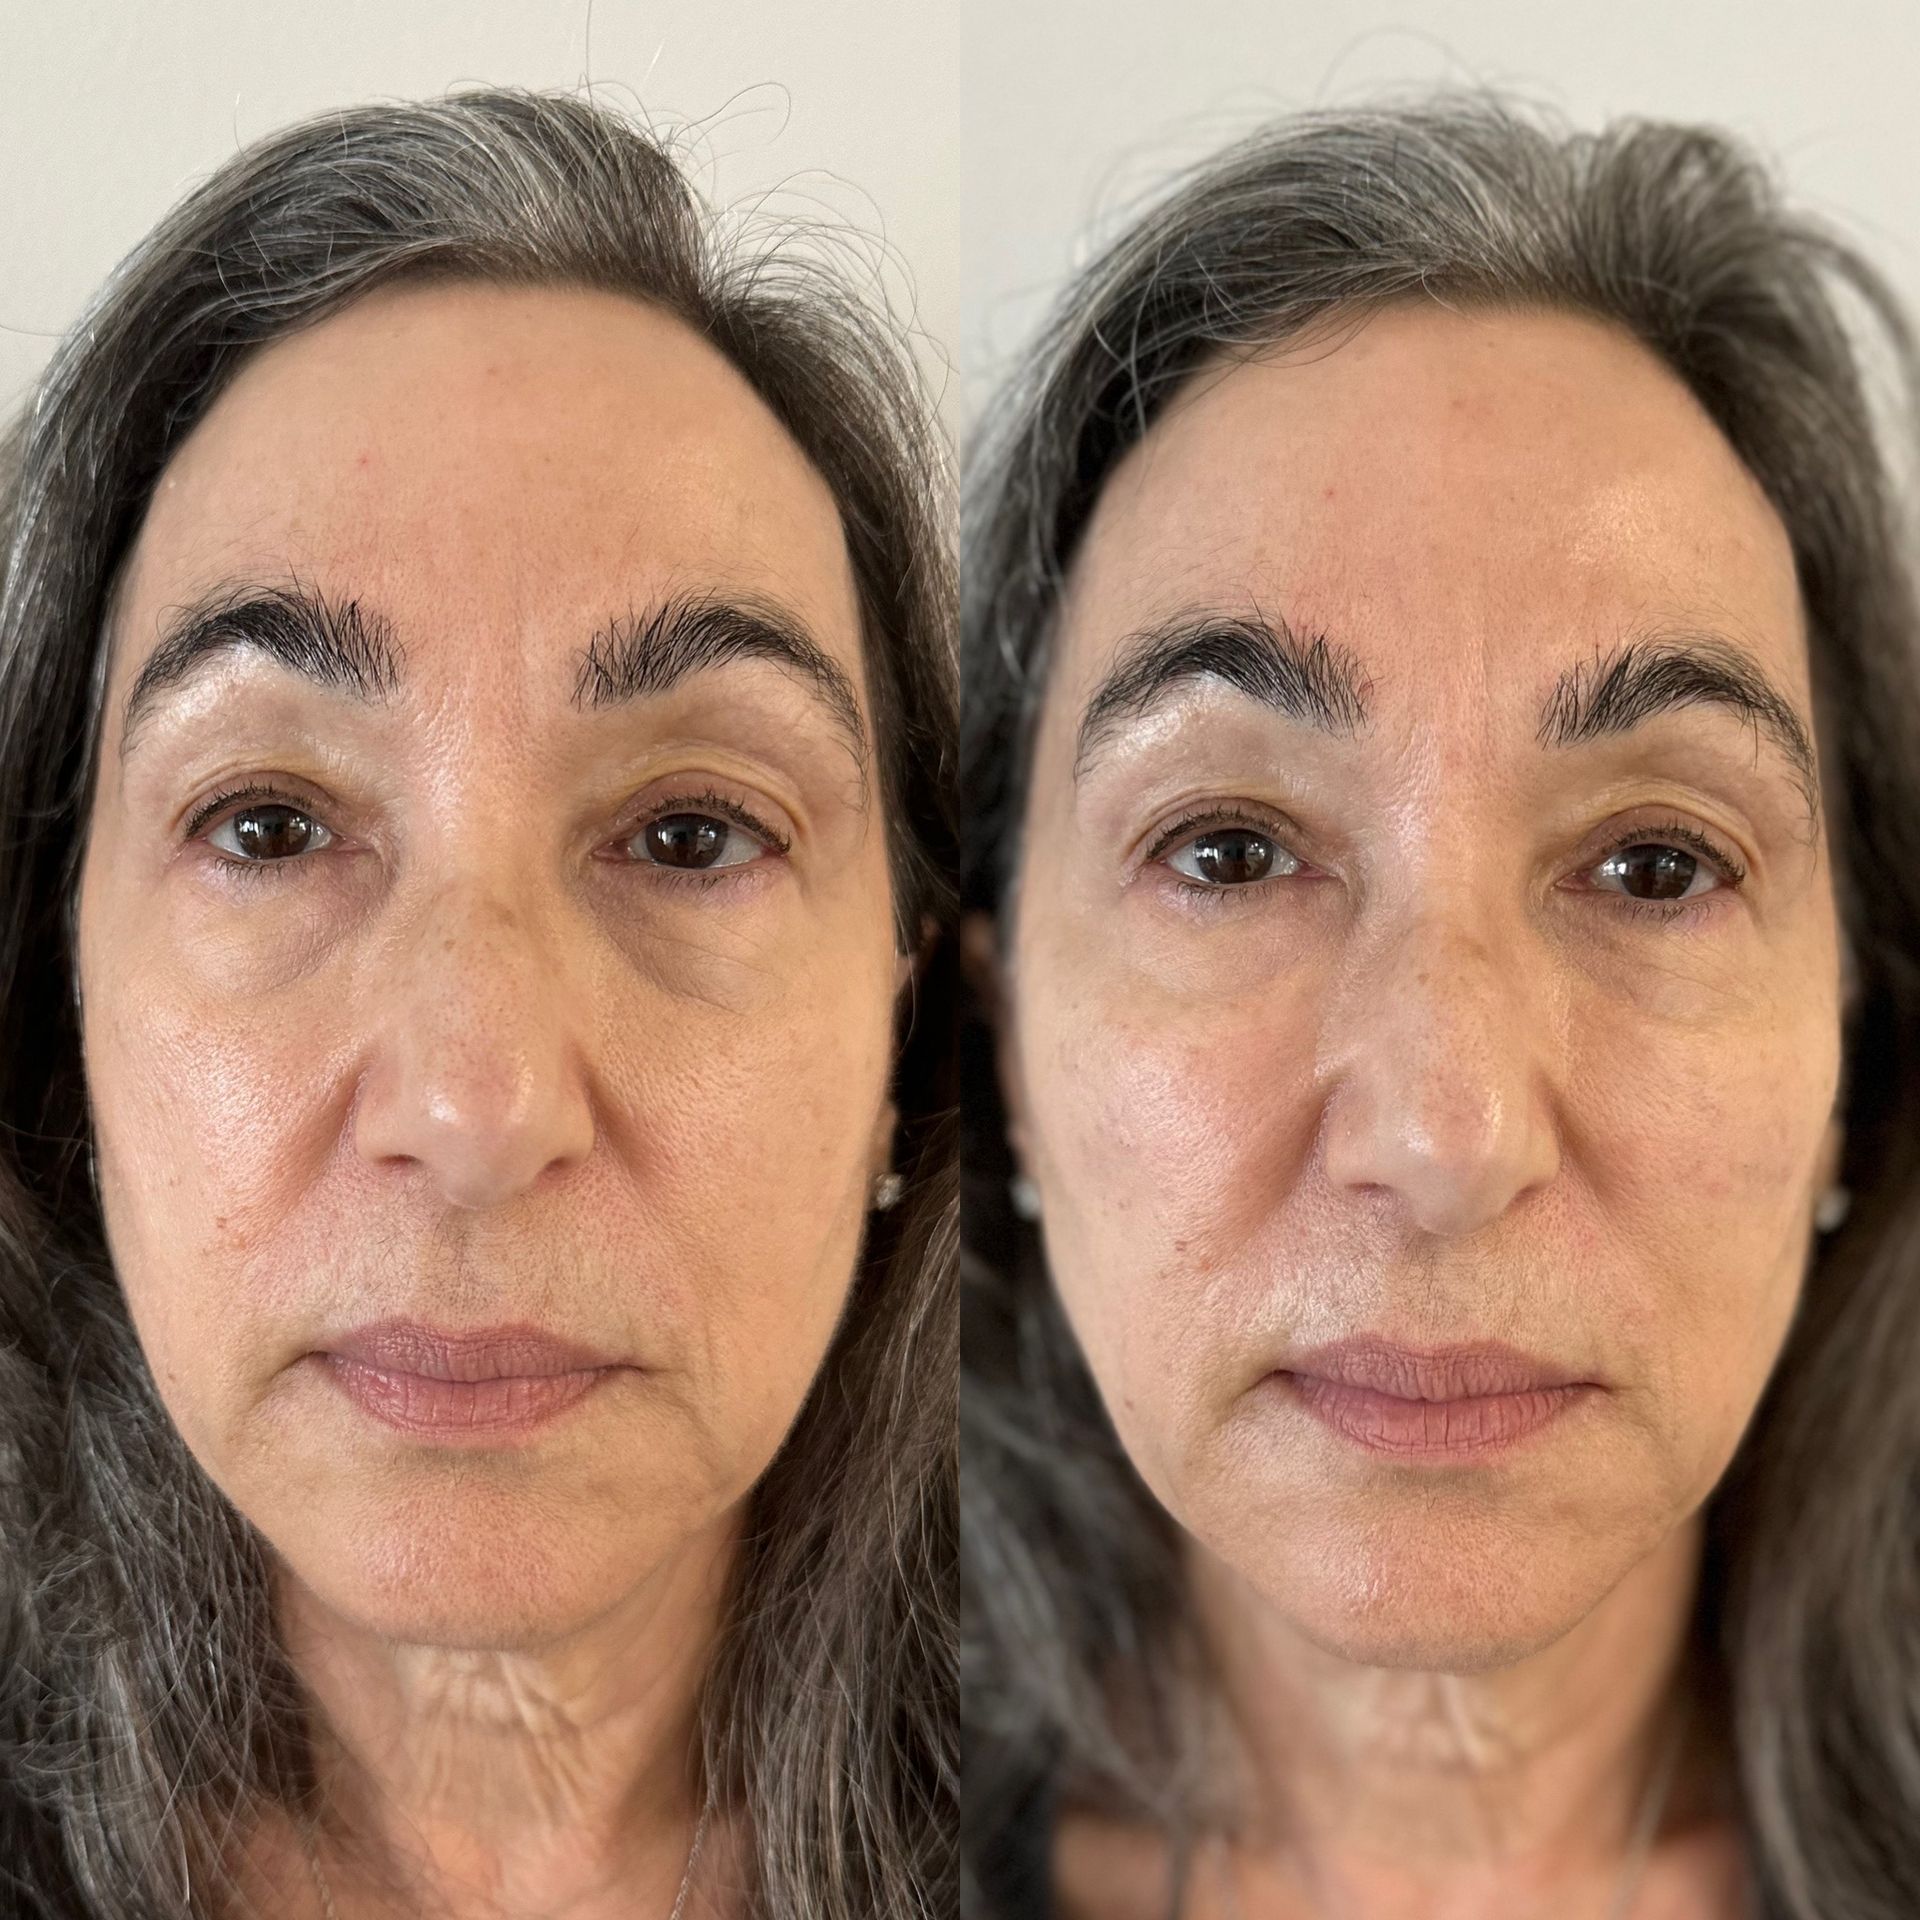 Sculptra treatment before and after results